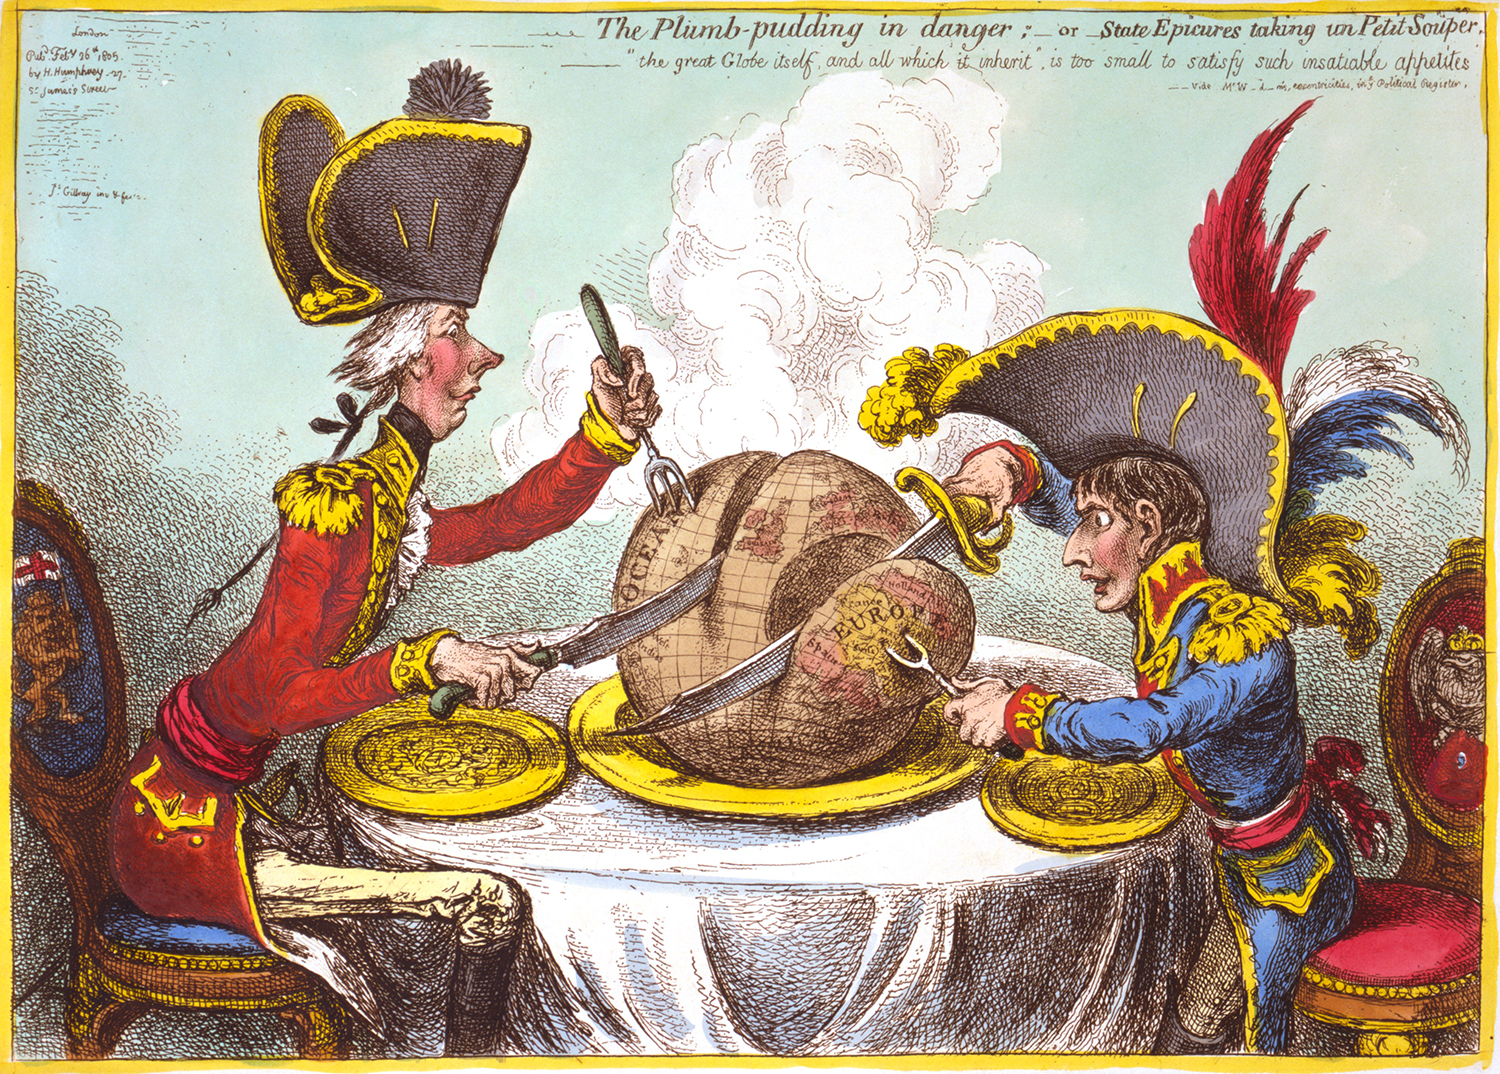 James Gillray, The Plumb-pudding in danger; or State Epicures taking un Petit Souper